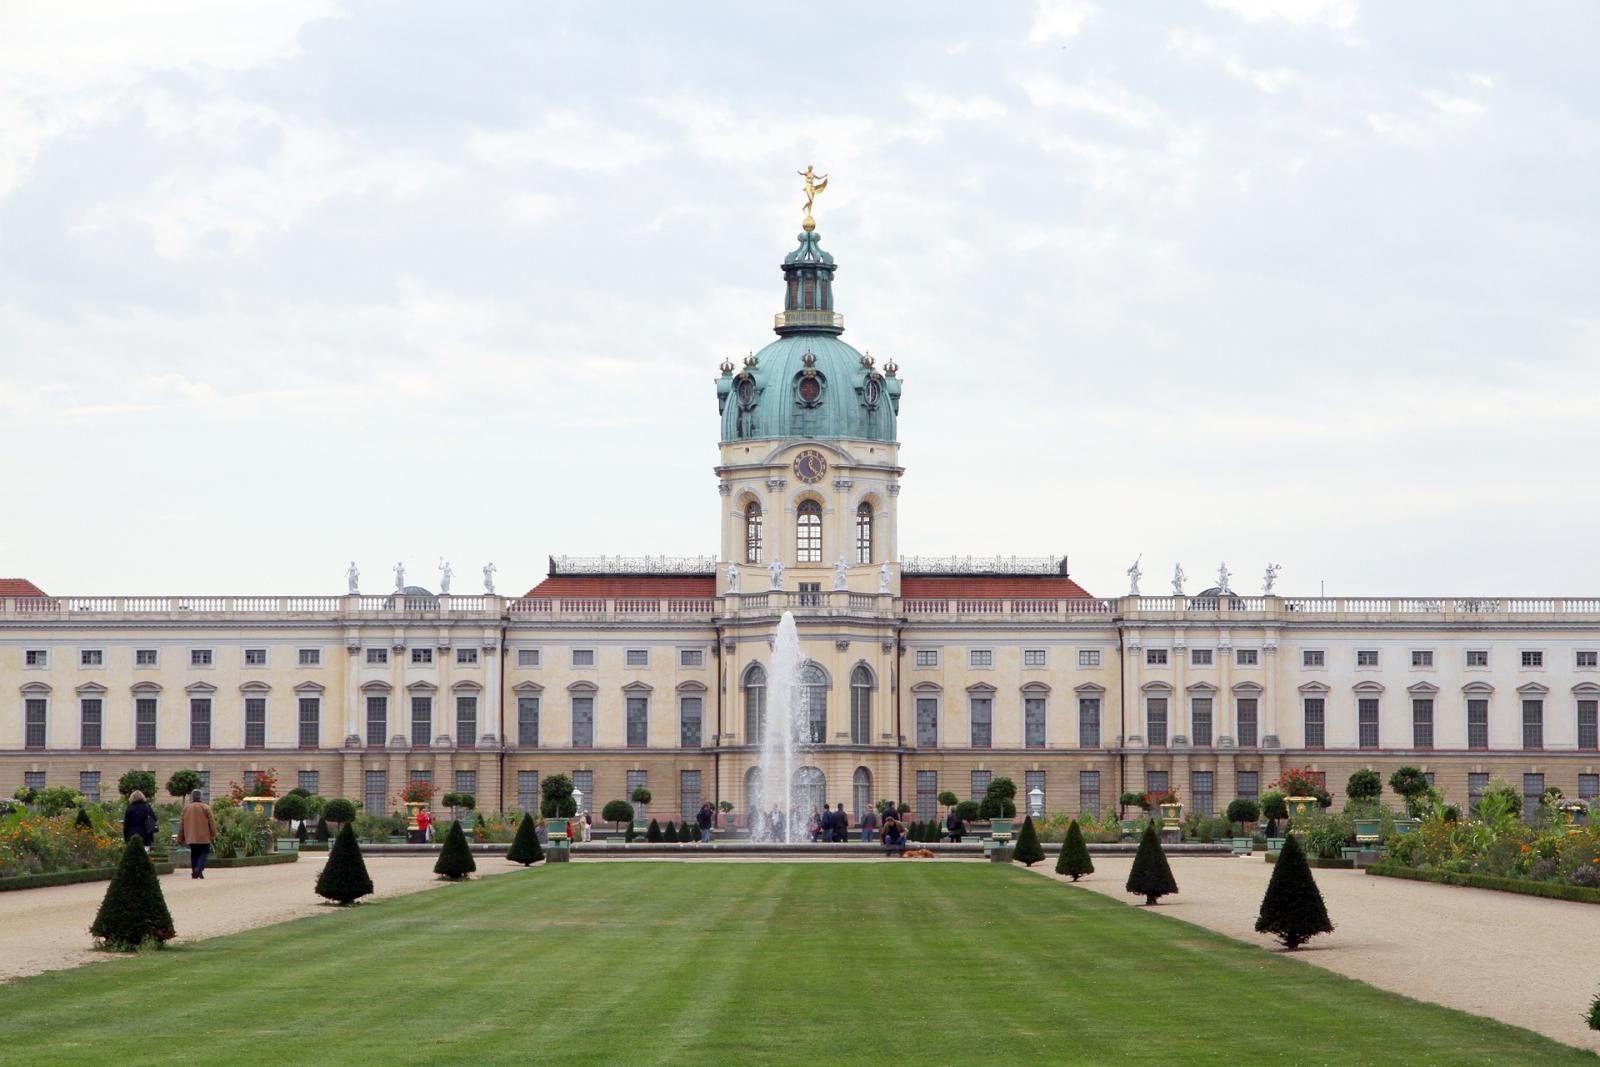 Trip To Potsdam From Berlin Into The Kingdom Of Prussian Kings With Drivenow